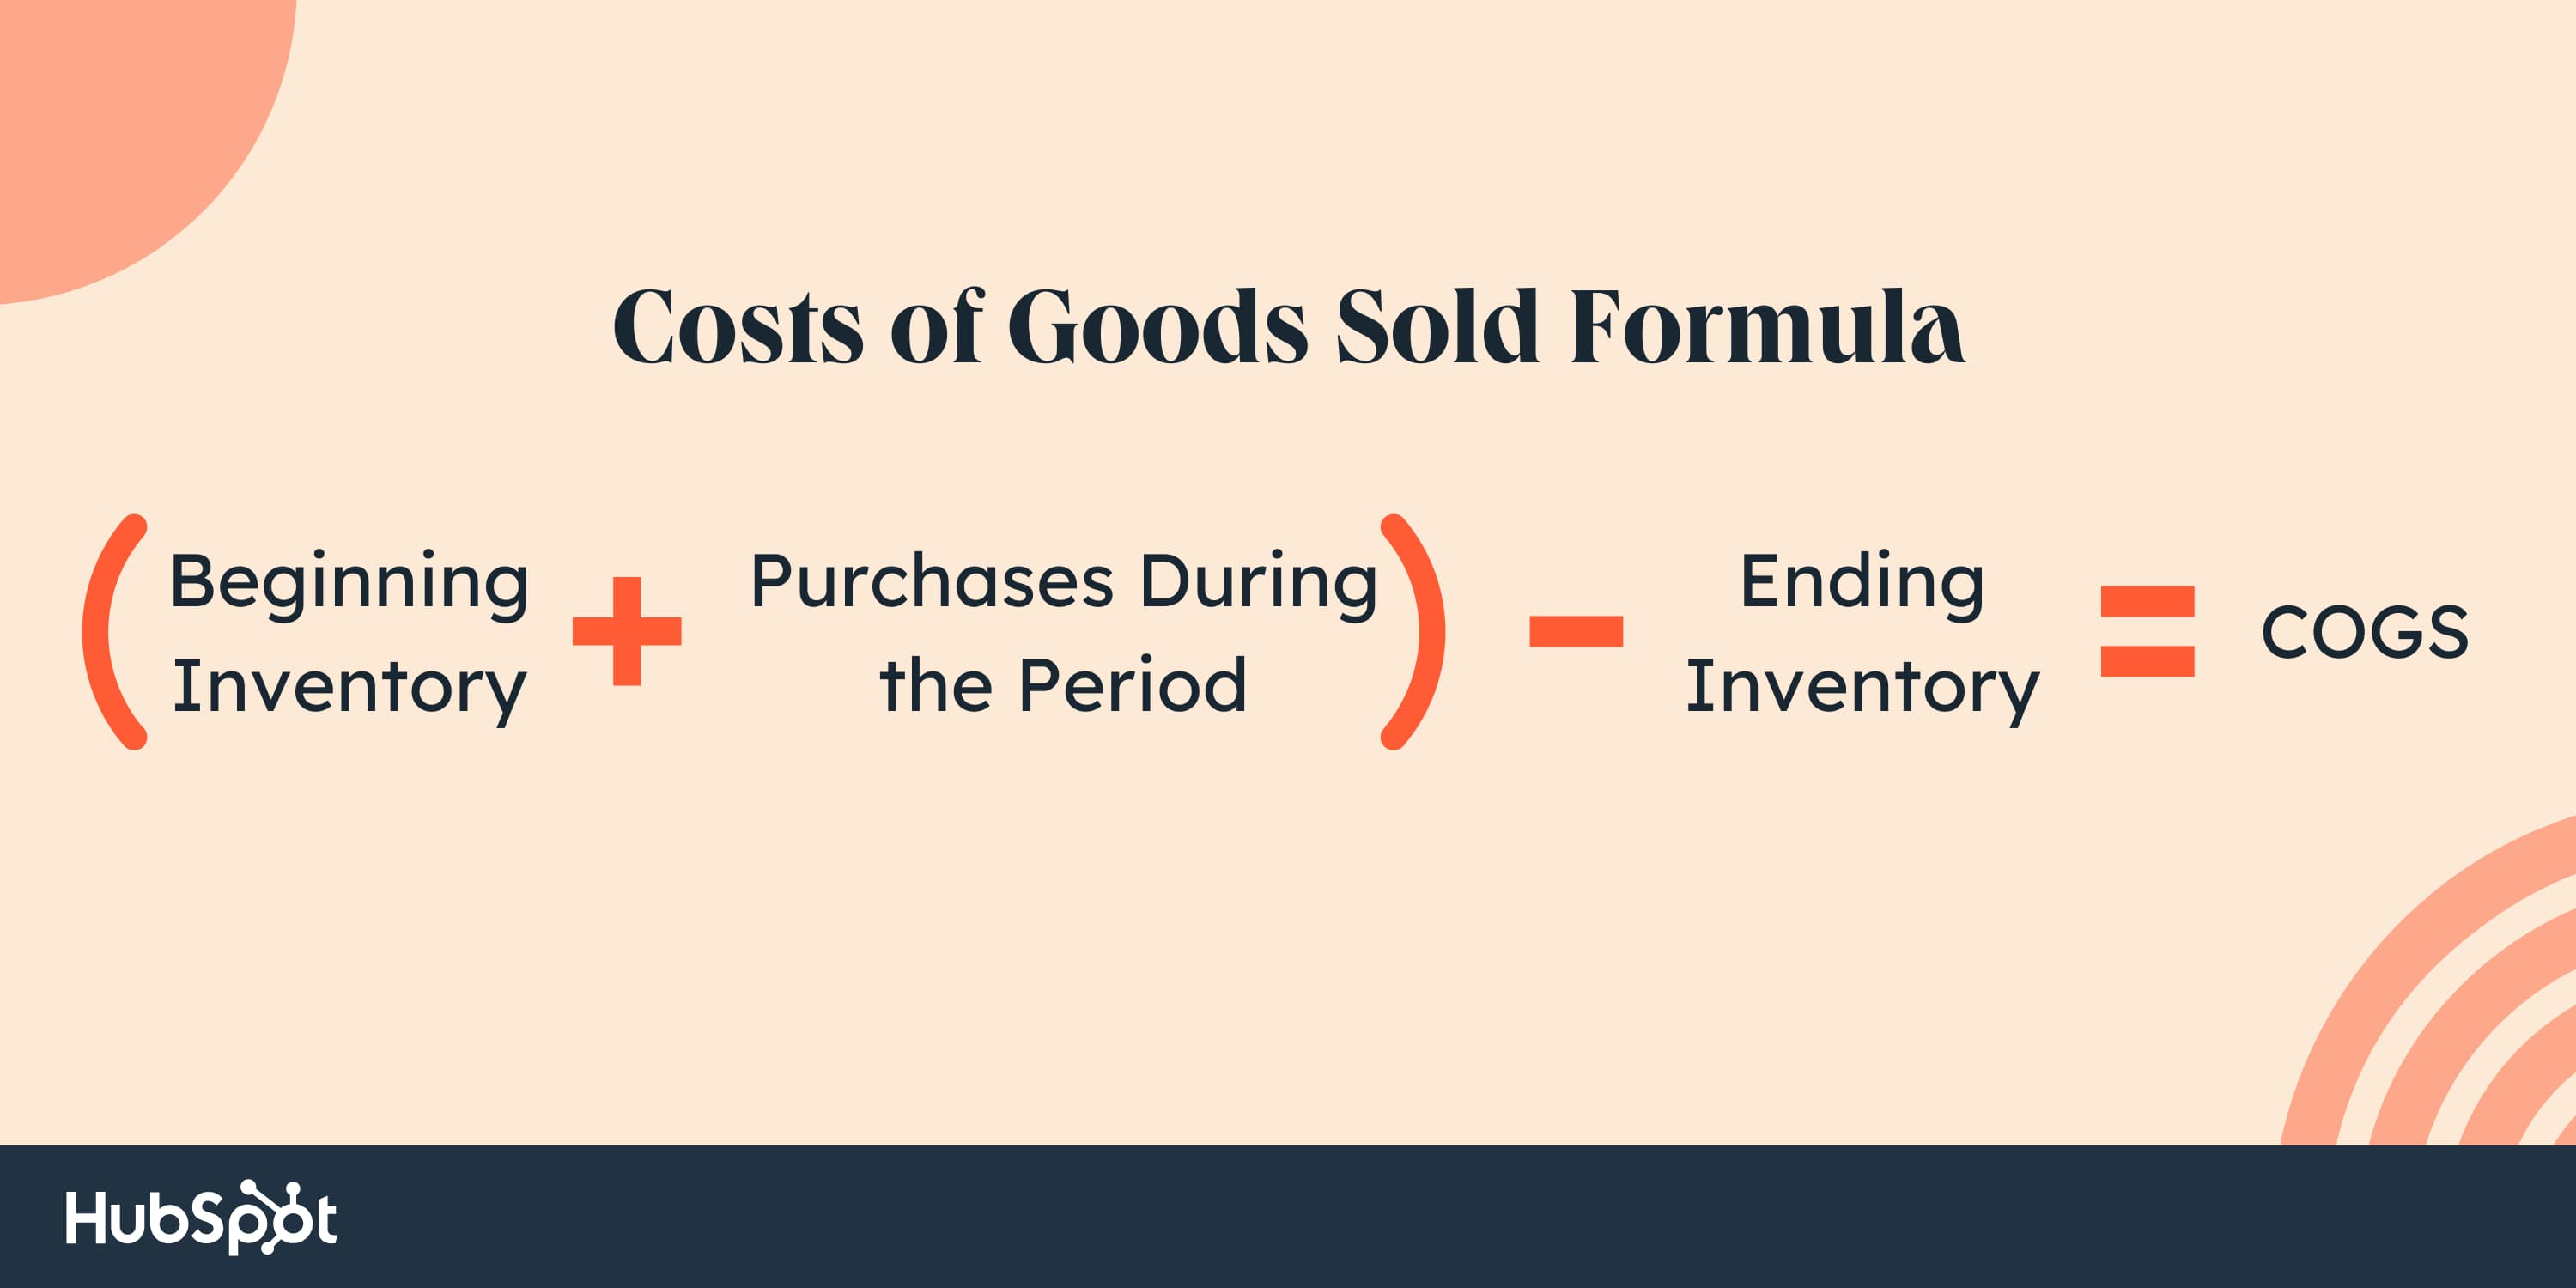 Beginning inventory + purchases during the period) – ending inventory = COGS